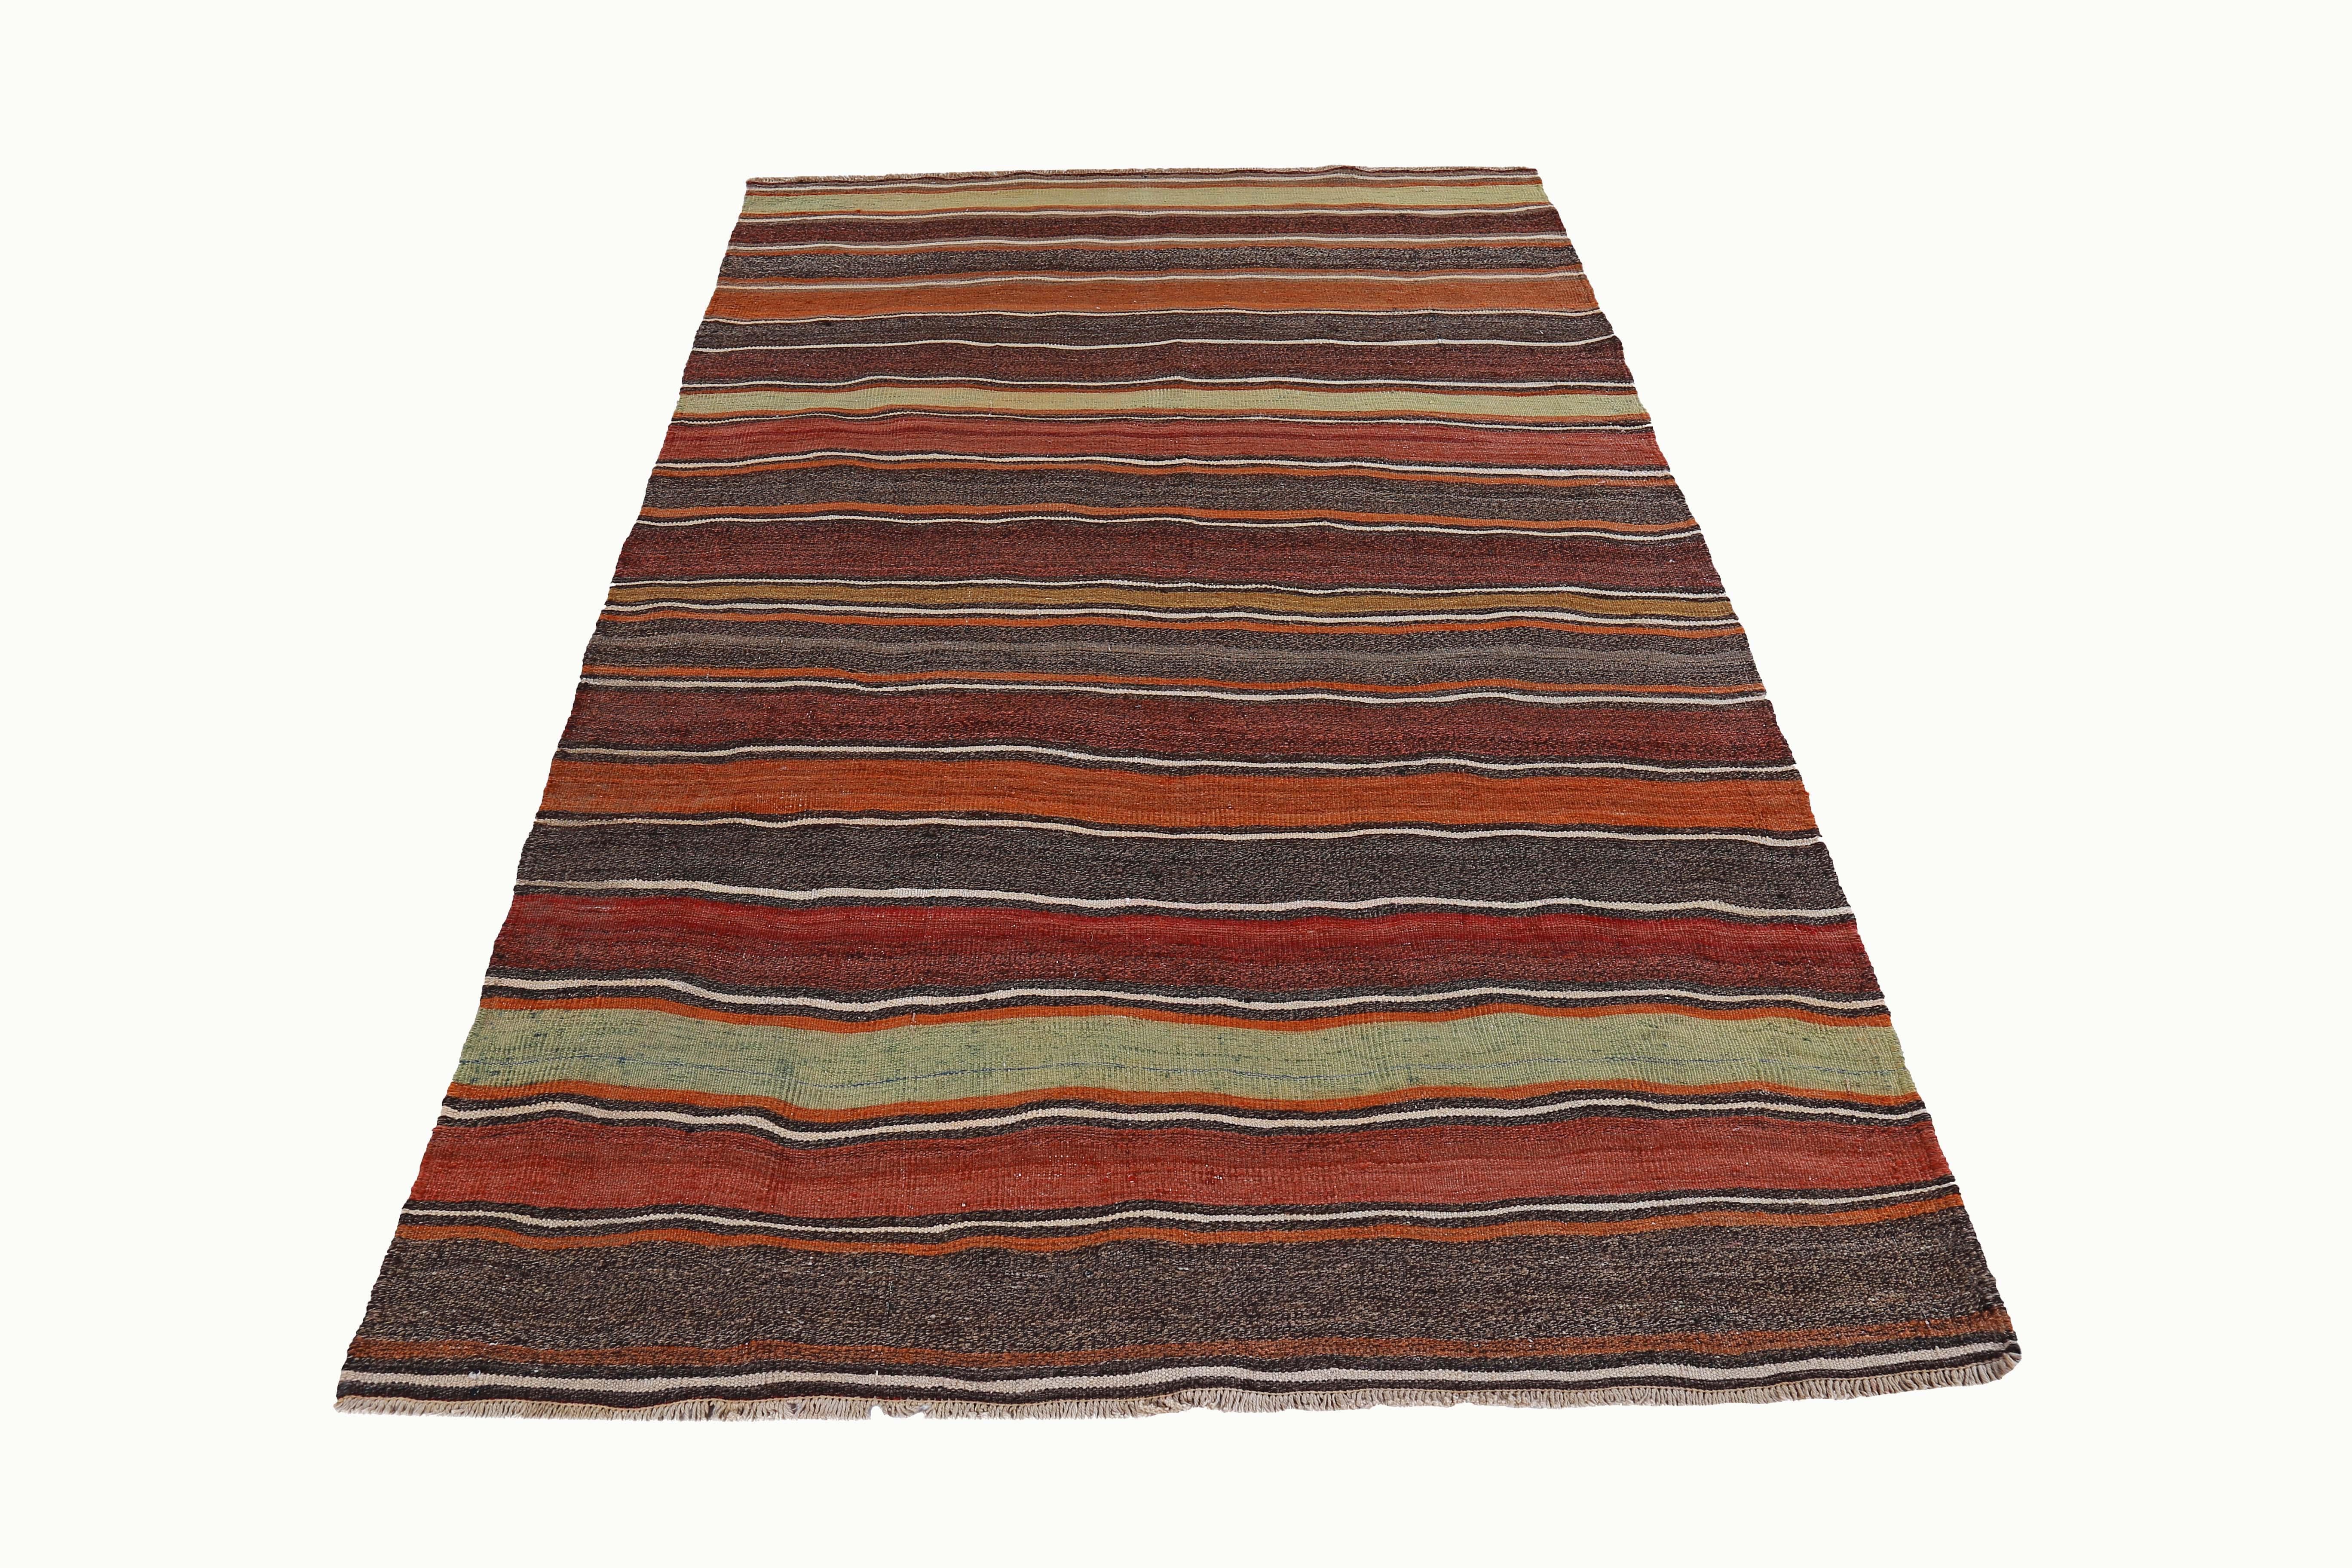 Turkish Kilim rug handwoven from the finest sheep’s wool and colored with all-natural vegetable dyes that are safe for humans and pets. It’s a traditional Kilim flat-weave design featuring red, yellow and orange stripes on a brown field. It’s a